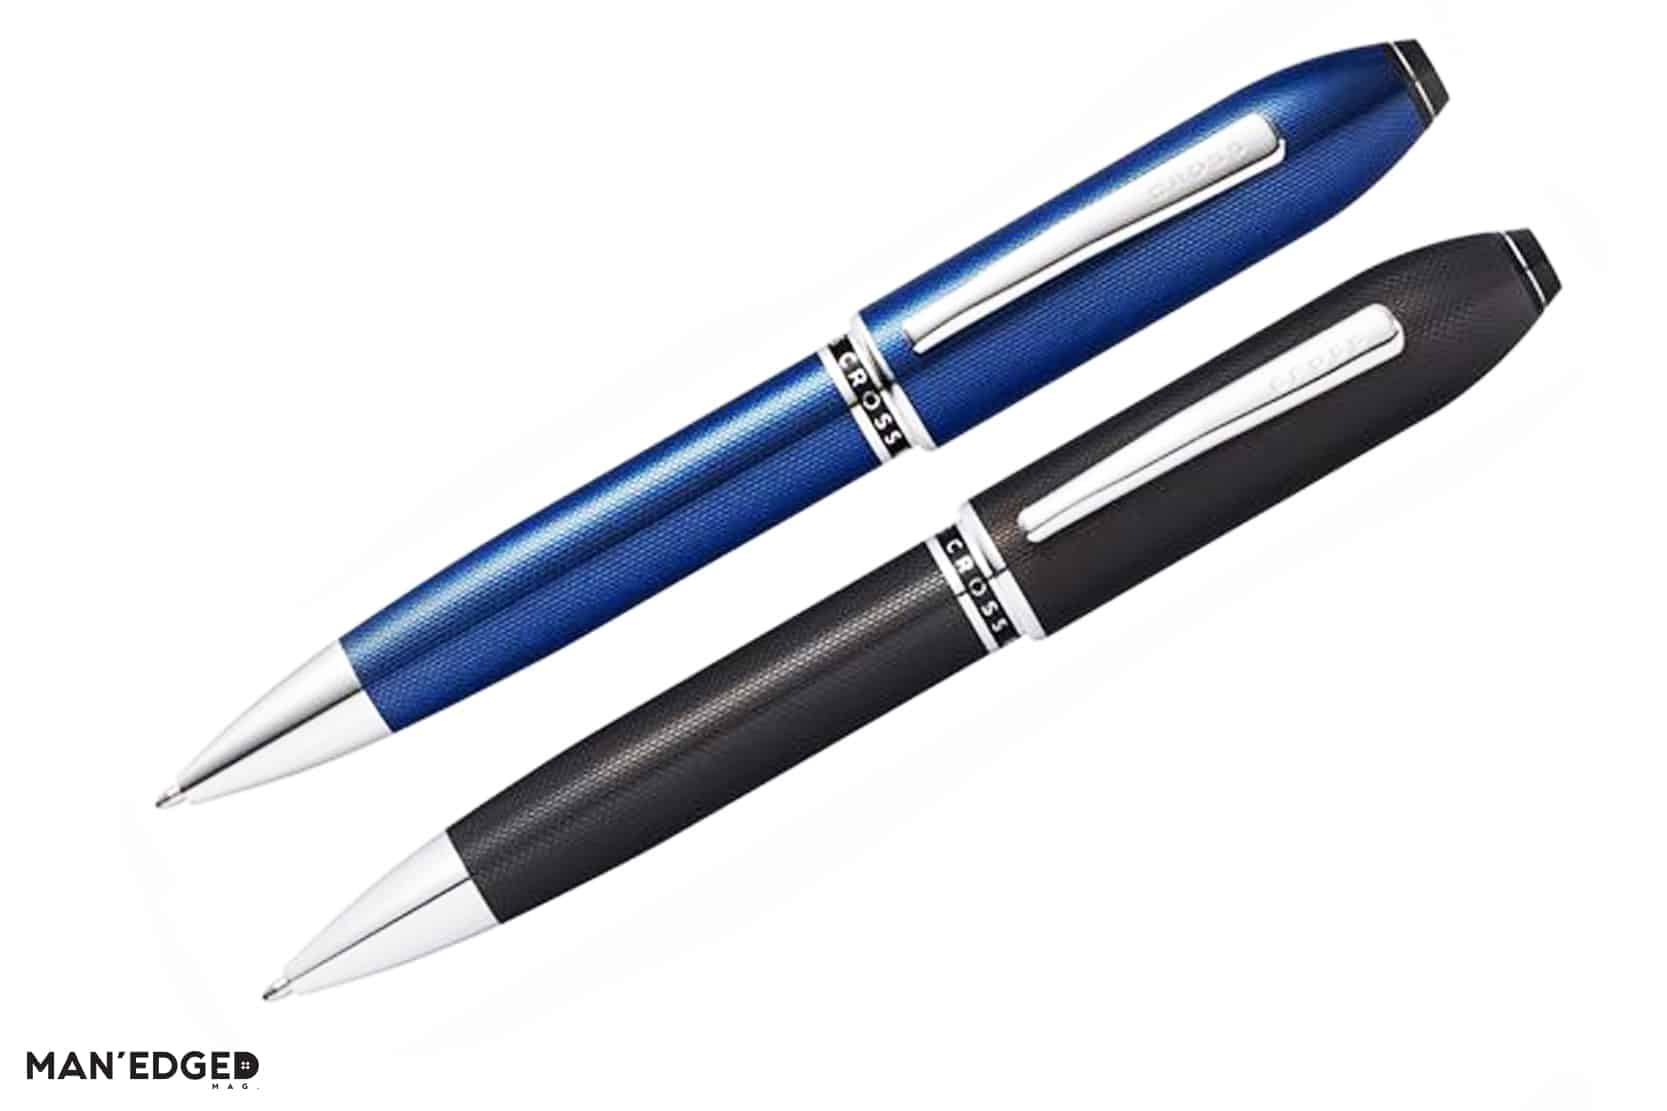 Blue and black pen in MAN'edged Magazine's best gift ideas for the tech guy